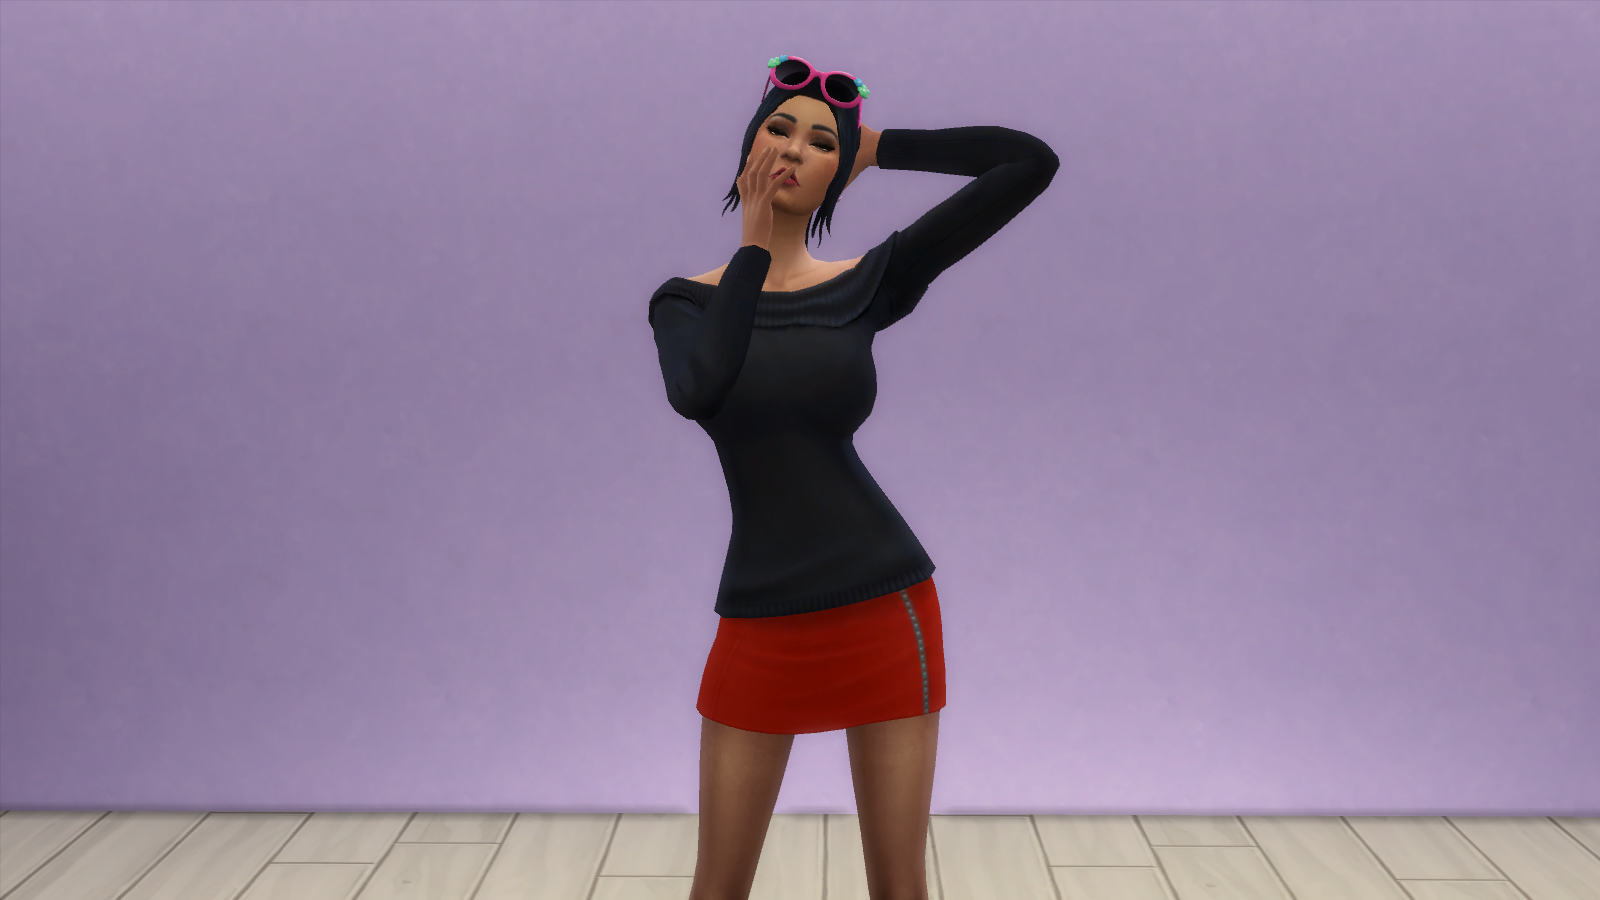 Saints Row for Sims 4: Viola DeWynter in Sims 4.